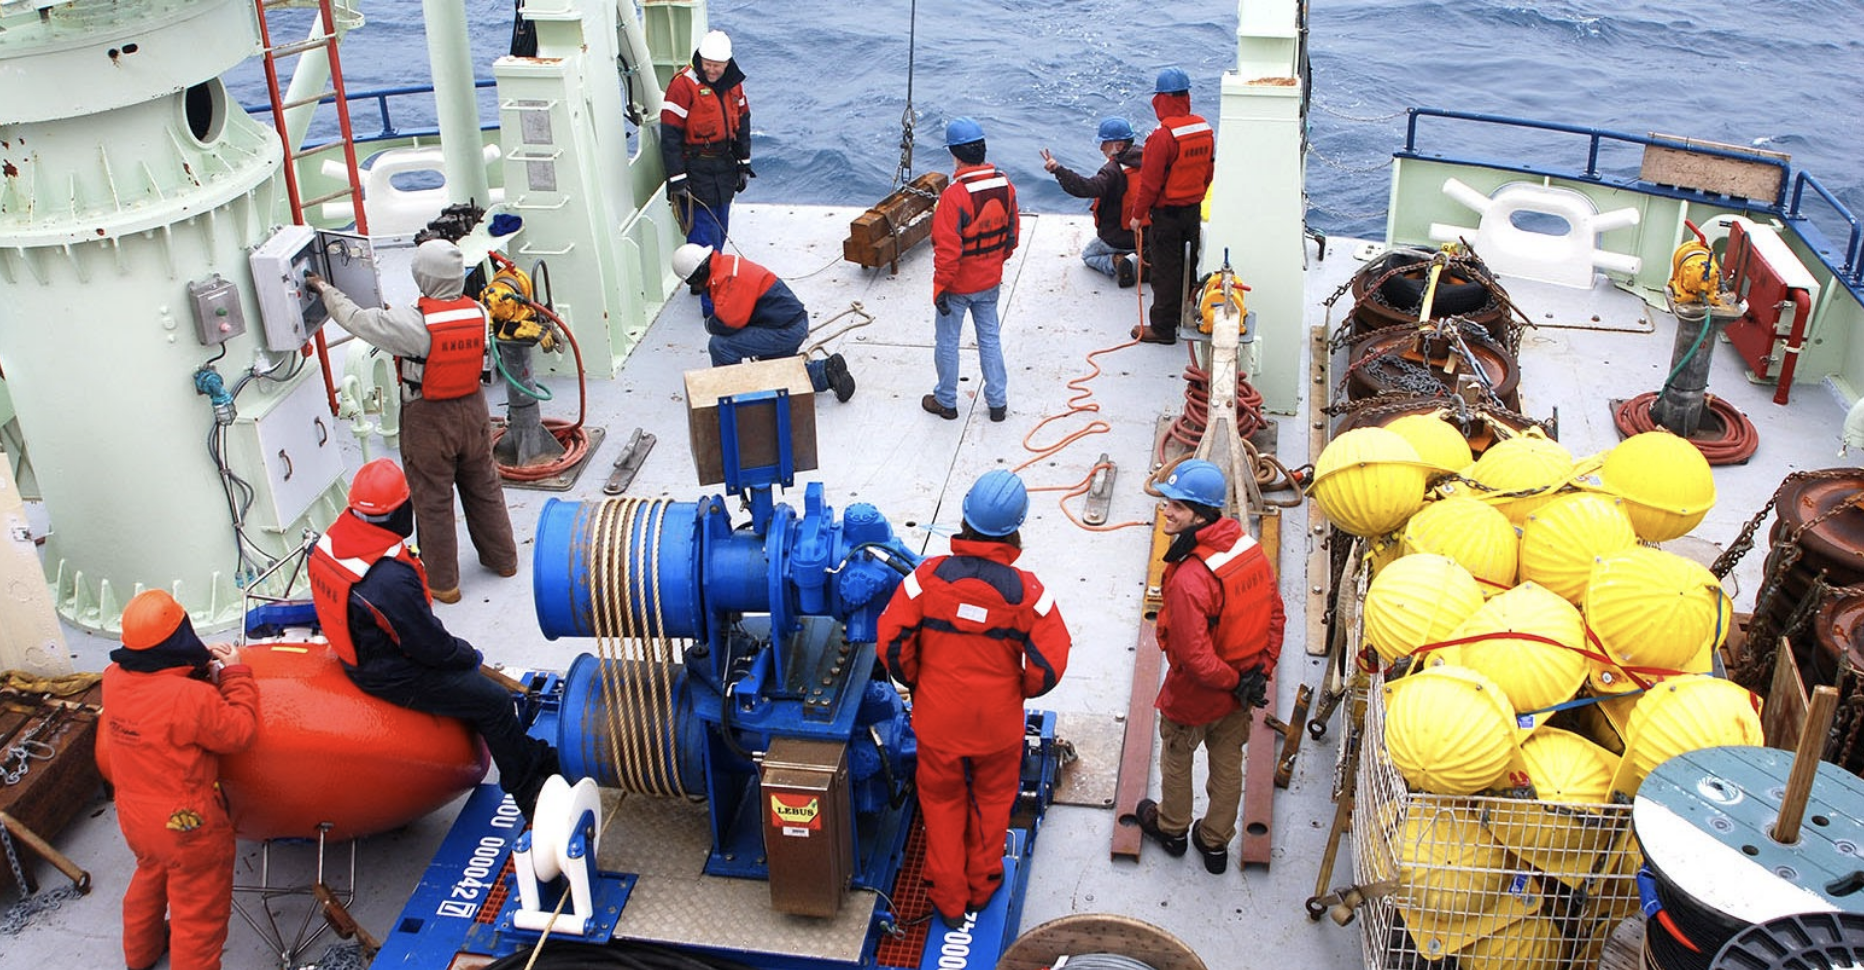 Researchers with OSNAP (Overturning in the Subpolar North Atlantic) prepare to launch marine sensors. (Photo: Heather Furey, Woods Hole Oceanographic Institution)